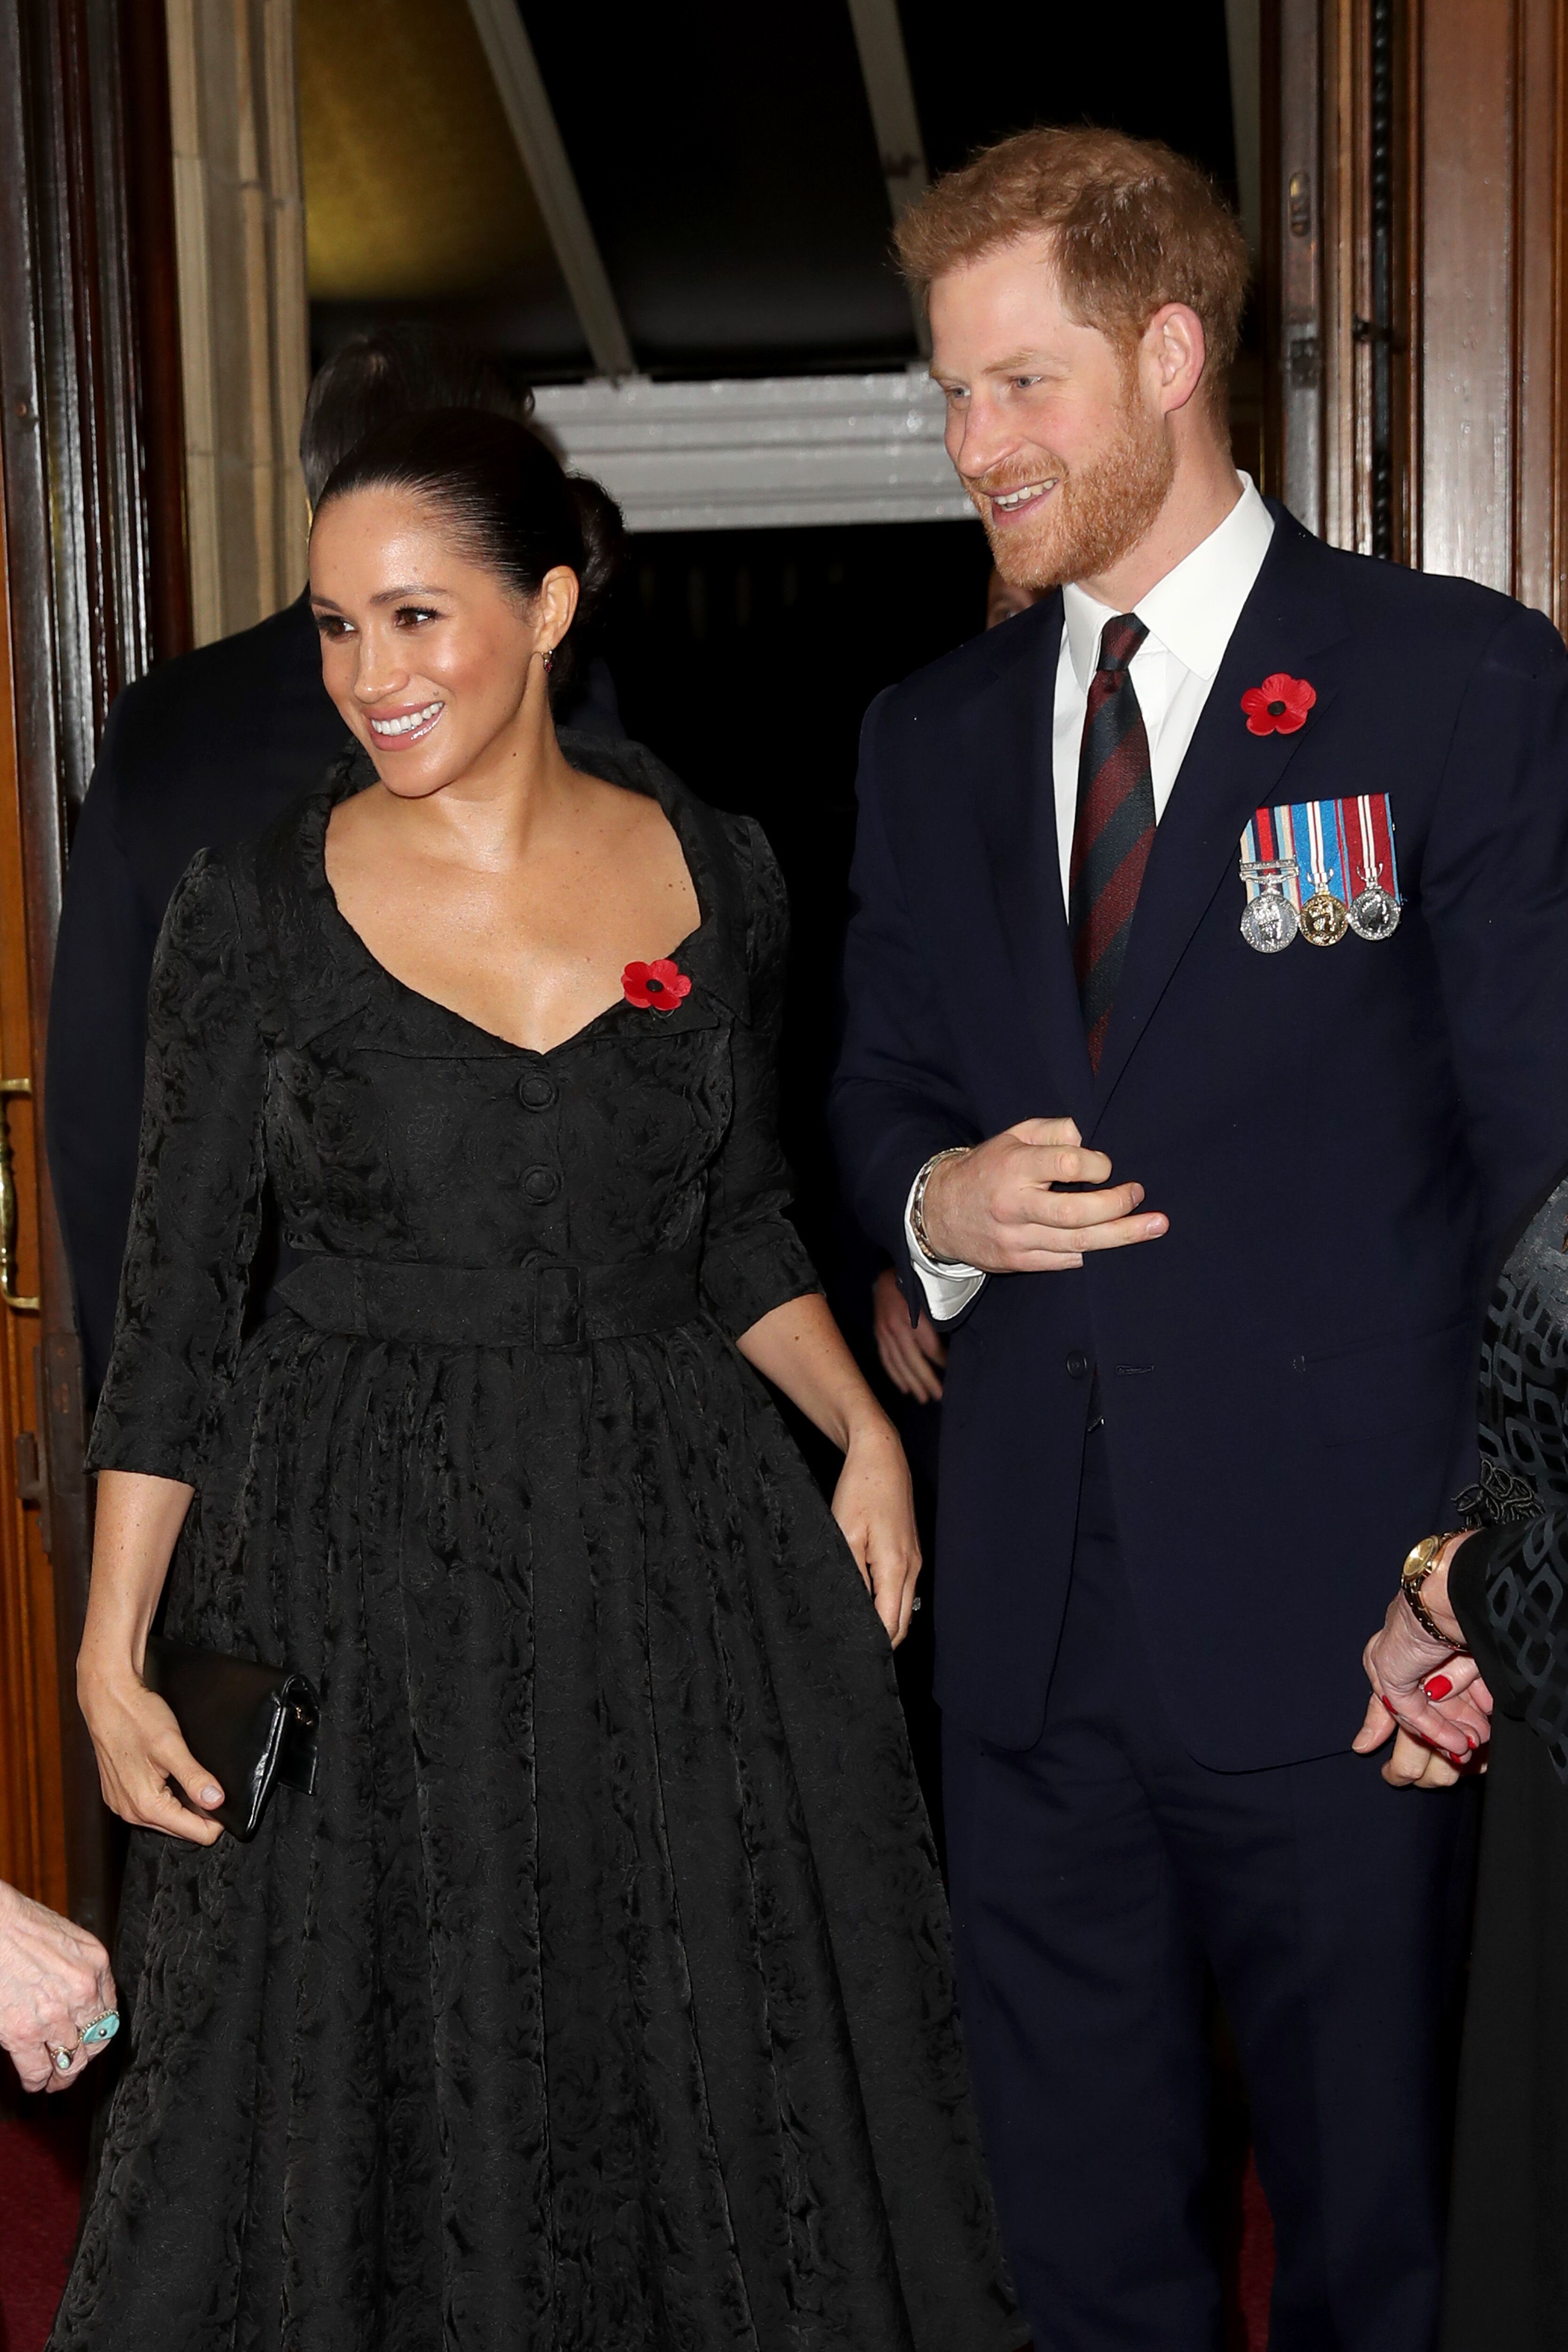 Duchess Meghan and Prince Harry at the annual Royal British Legion Festival of Remembrance on November 09, 2019, in London, England | Photo: Getty Images